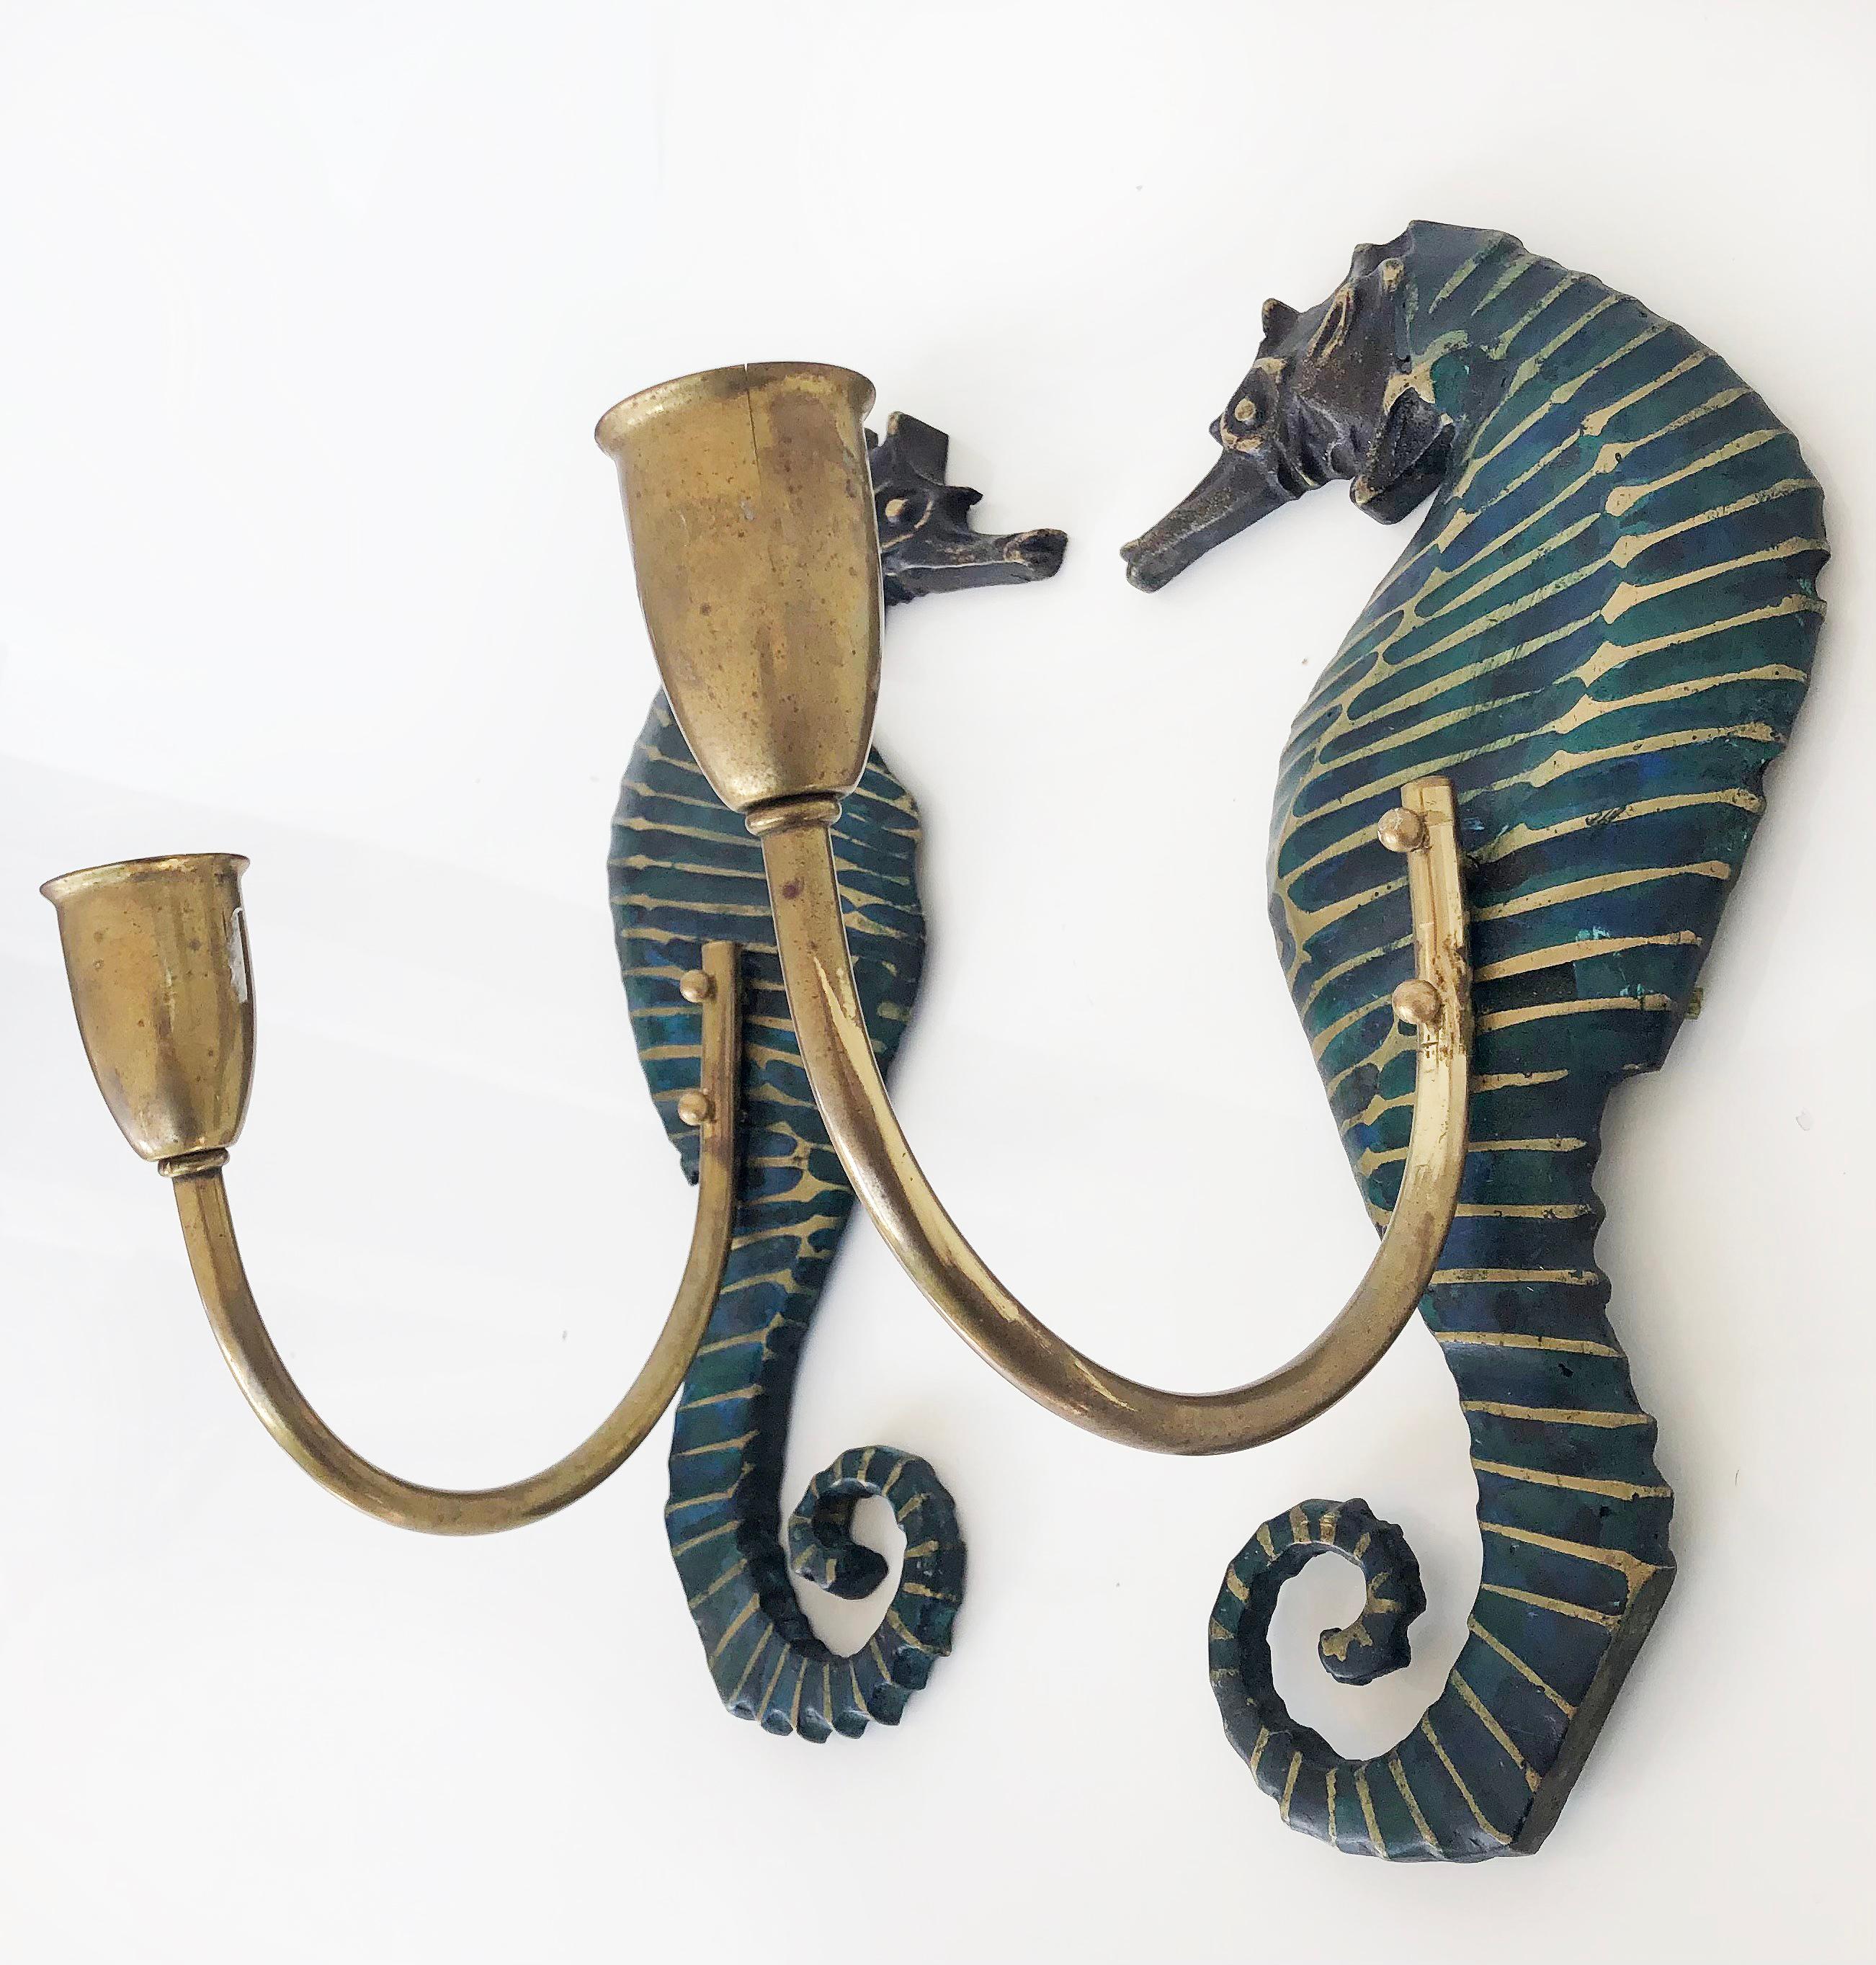 Pepe Mendoza 1960s brass malachite seahorse sconces, pair

Offered for sale is a pair of Pepe Mendoza Mexican Mid-Century Modern brass and malachite seahorse sconces. The pair has been wired and is ready to install. The sconces are identical in size